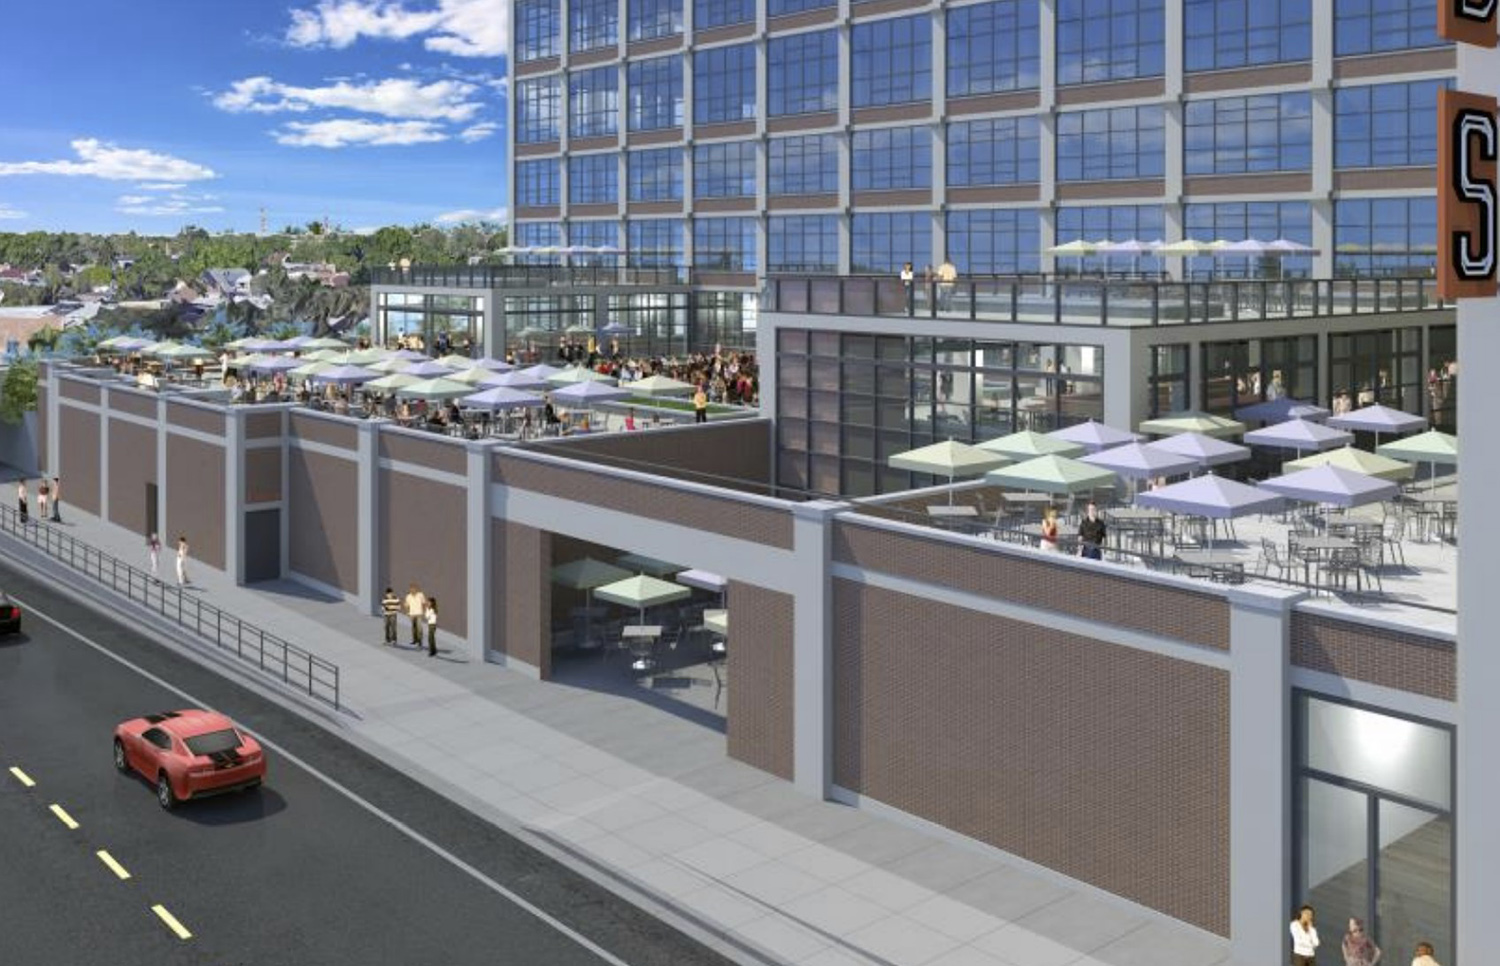 View of New Rooftop Deck at The Fields Development at 4000 W Diversey. Rendering by HirschMPG